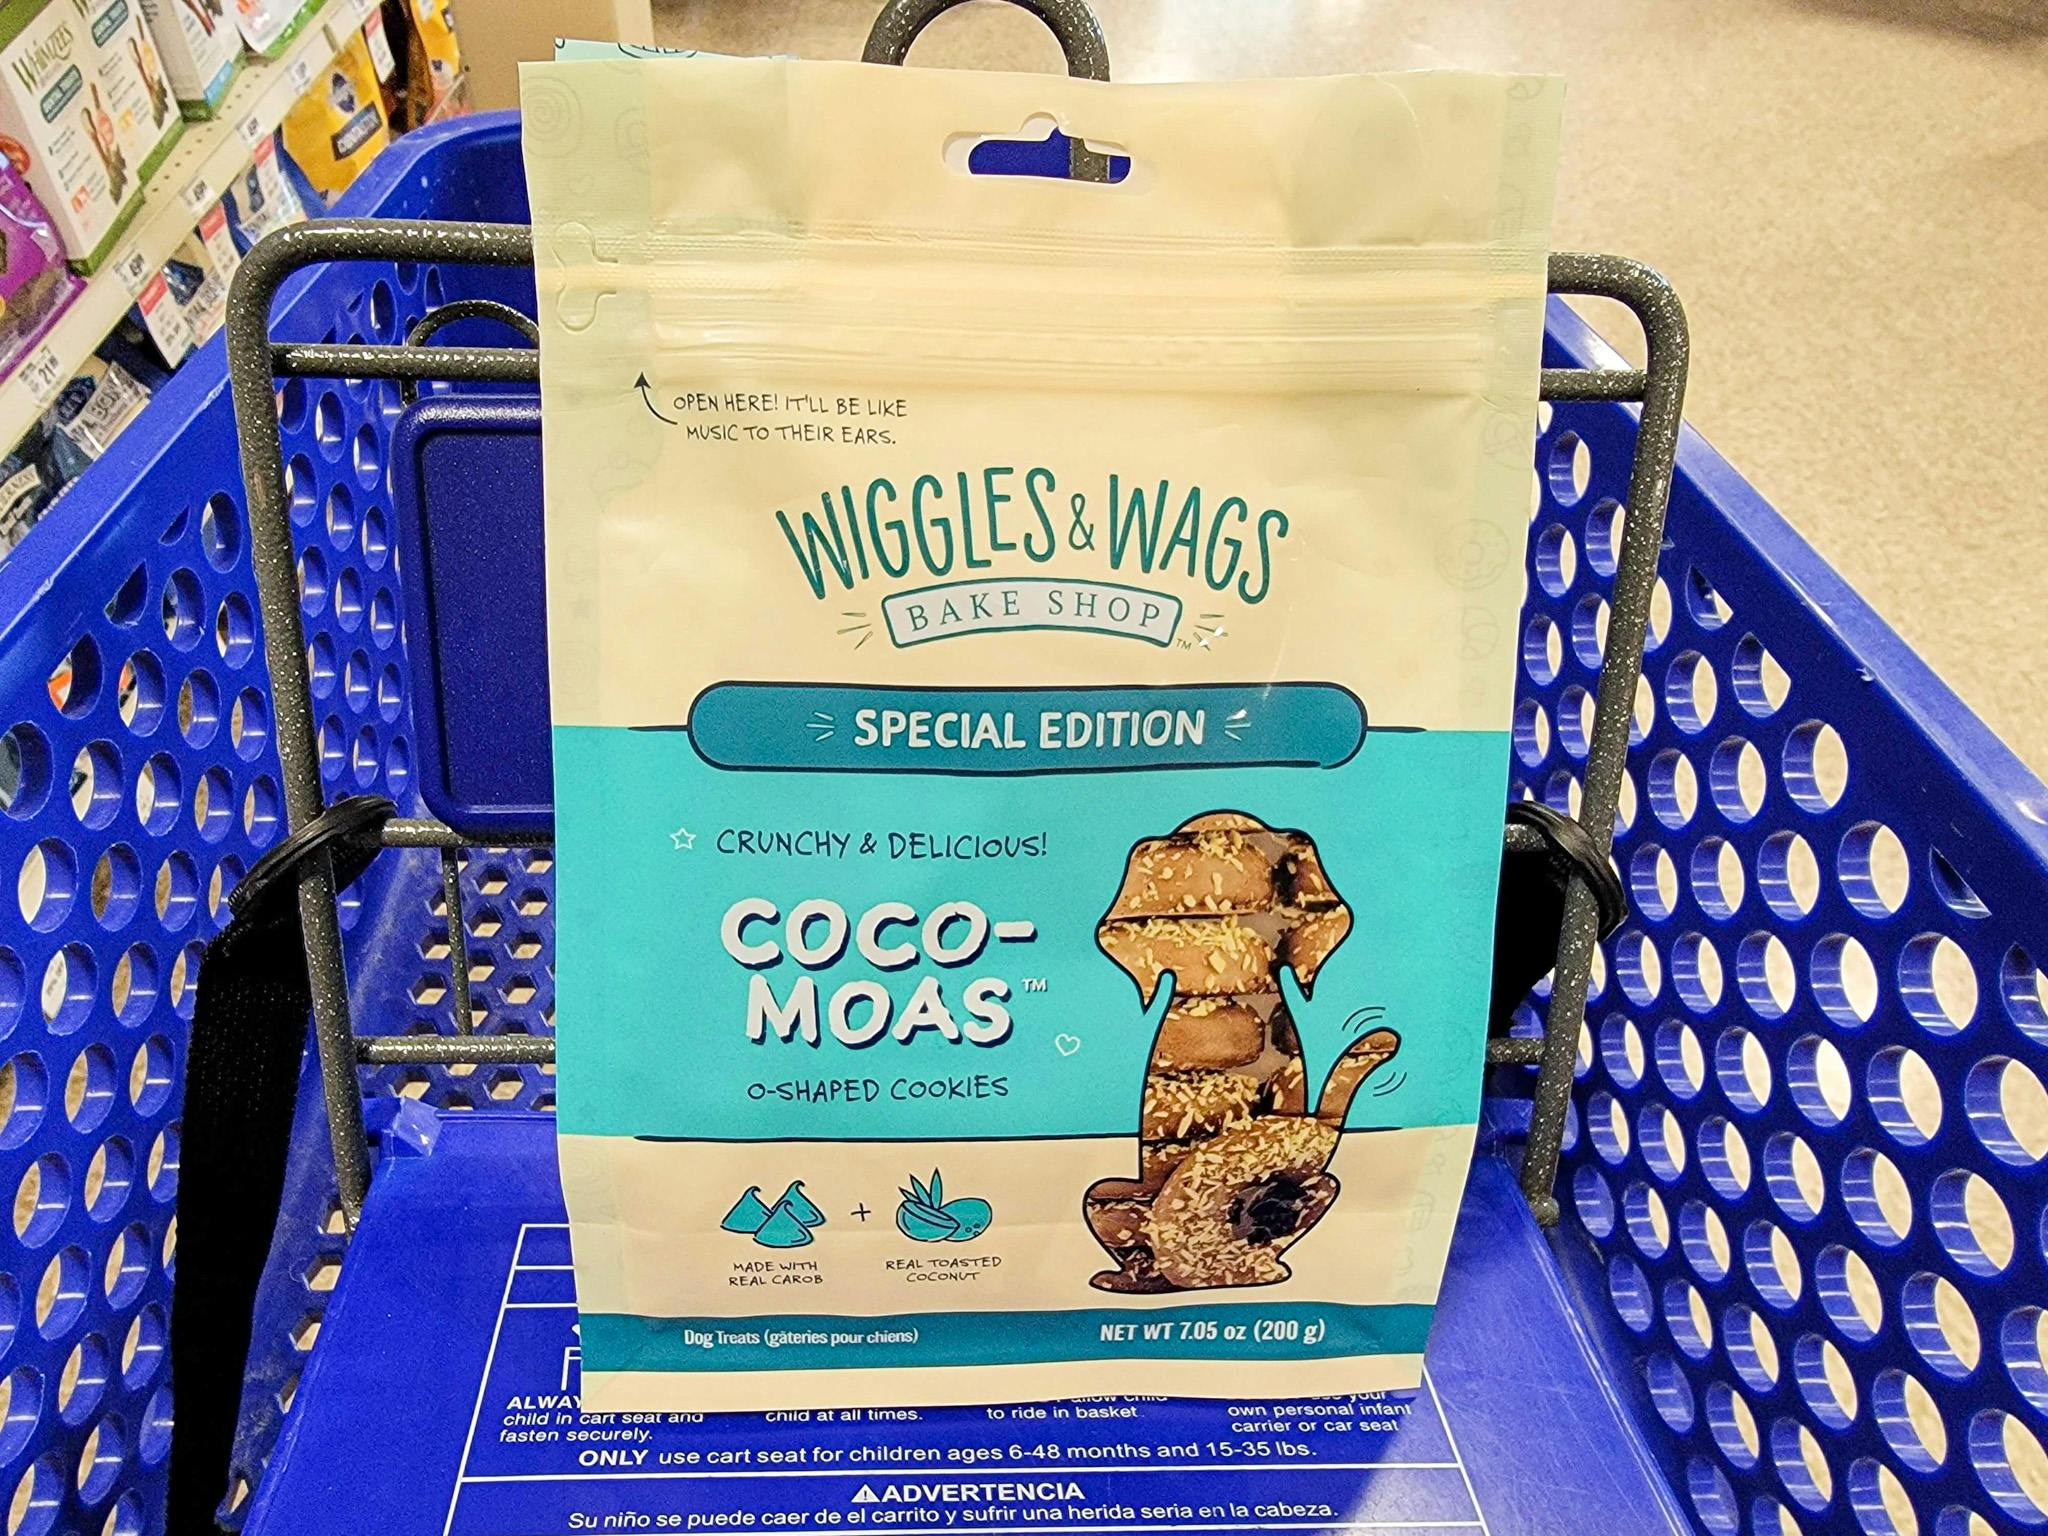 bag of dog treats in a cart